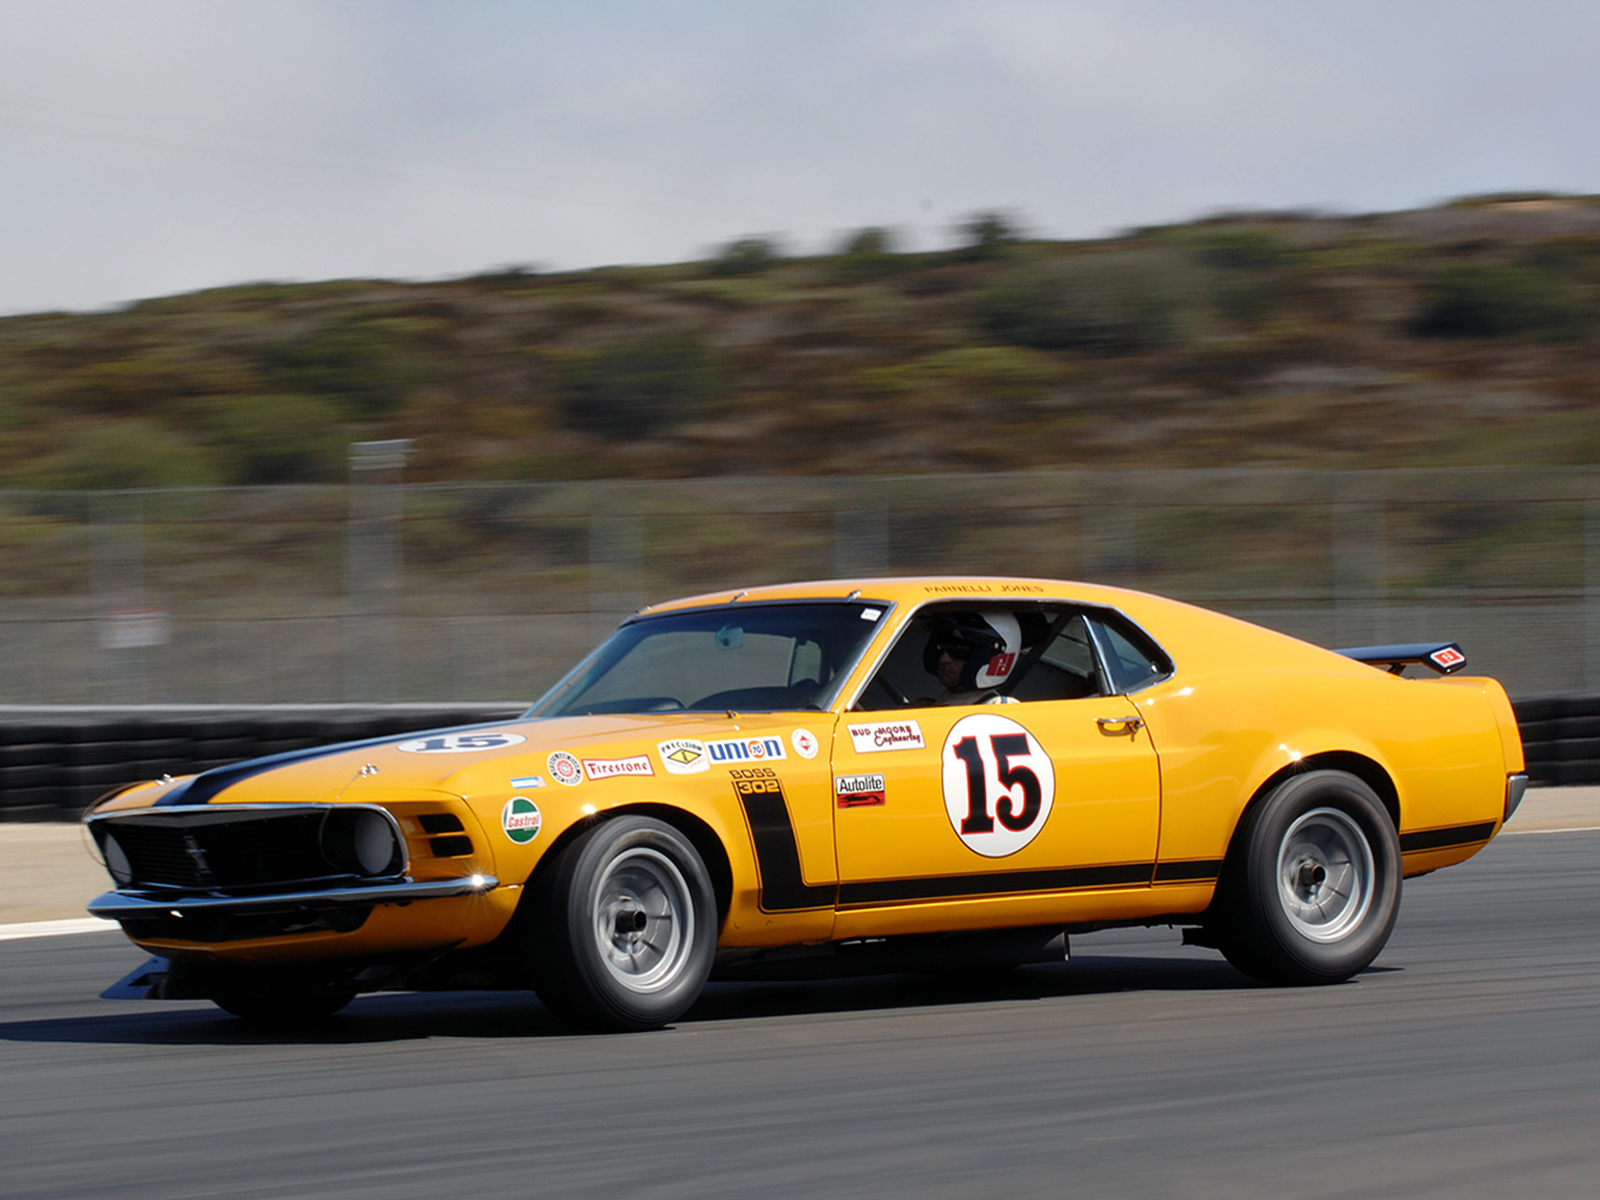 Vehicles Ford Mustang Boss 302 HD Wallpaper | Background Image